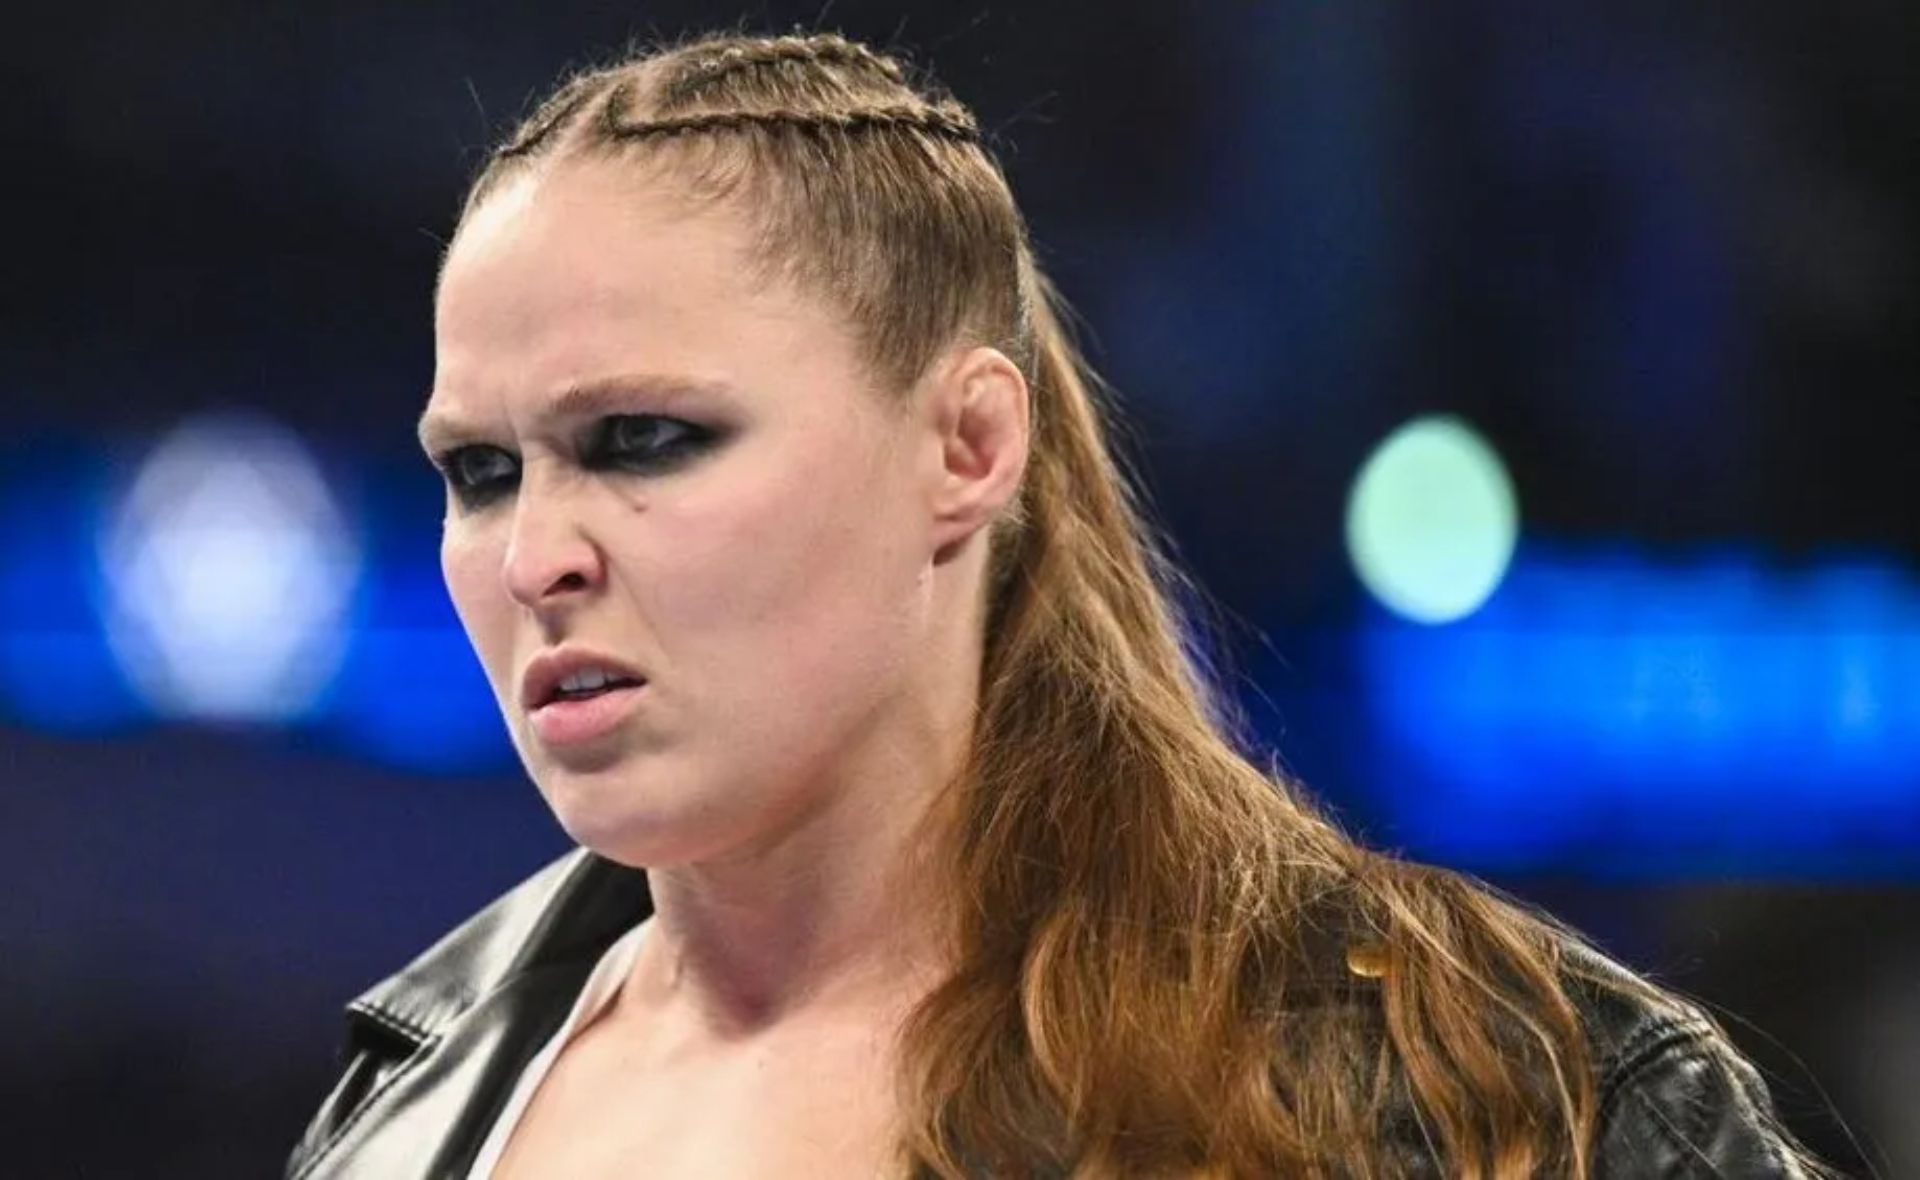 Ronda Rousey has struggled to connect emotionally with the WWE Universe.